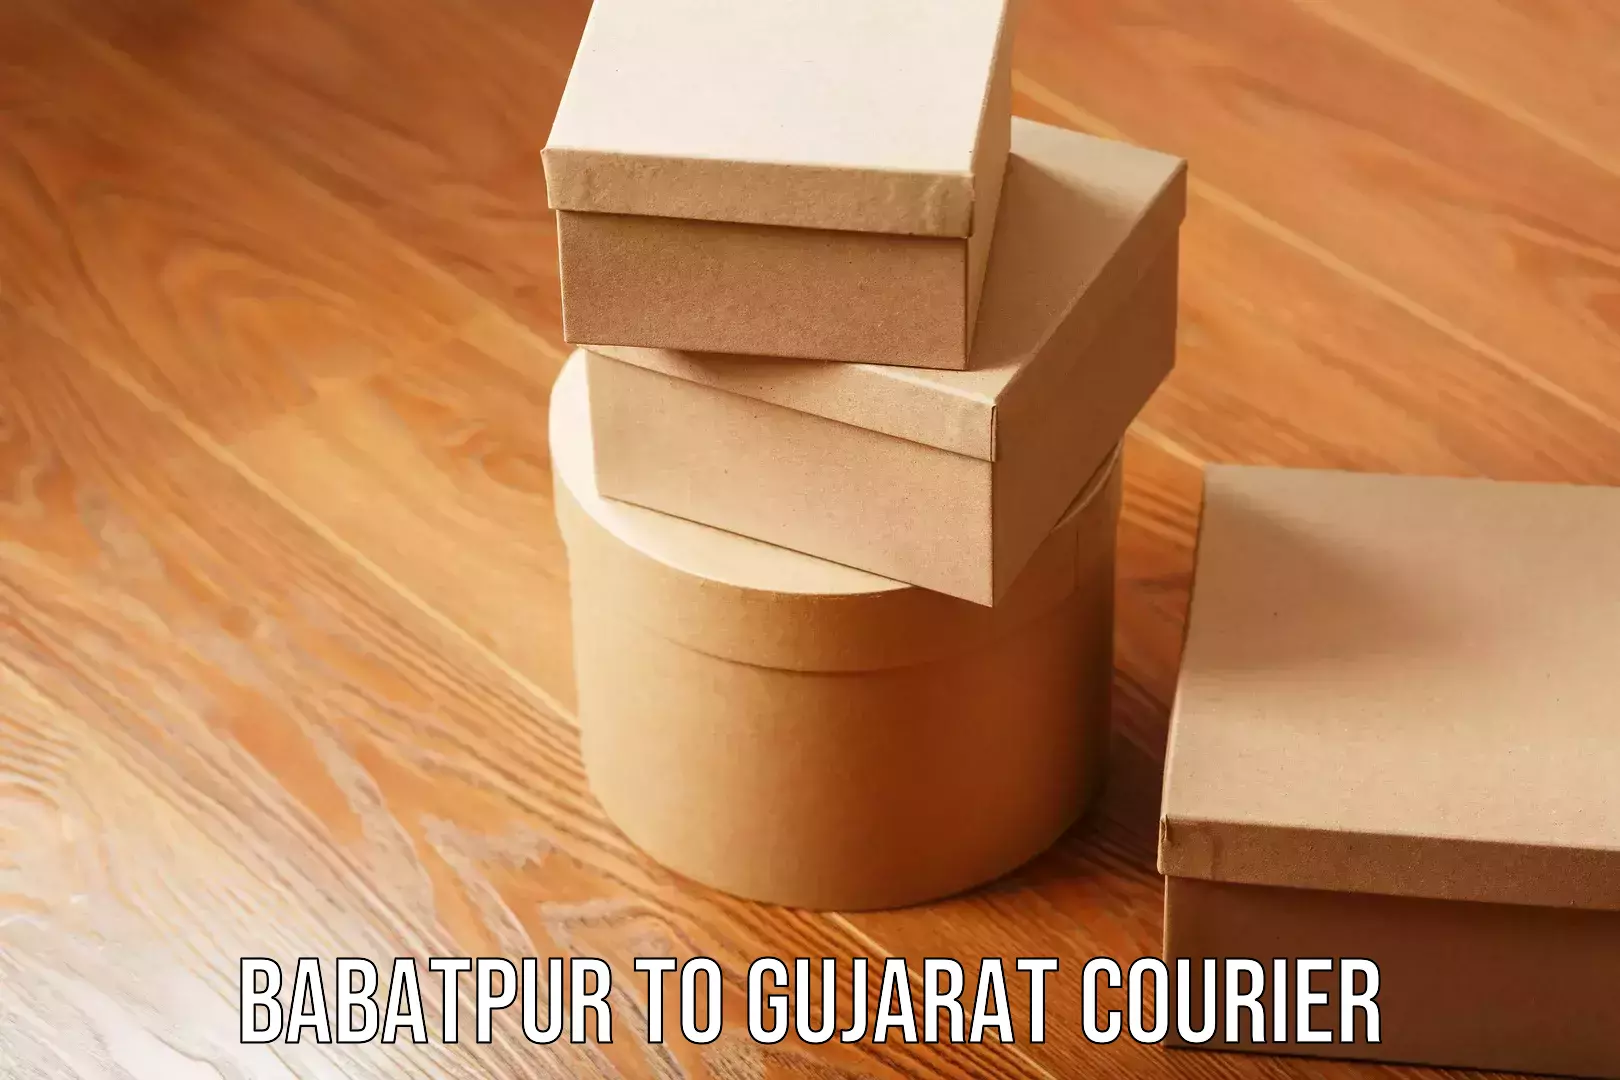 End-to-end delivery Babatpur to Gujarat